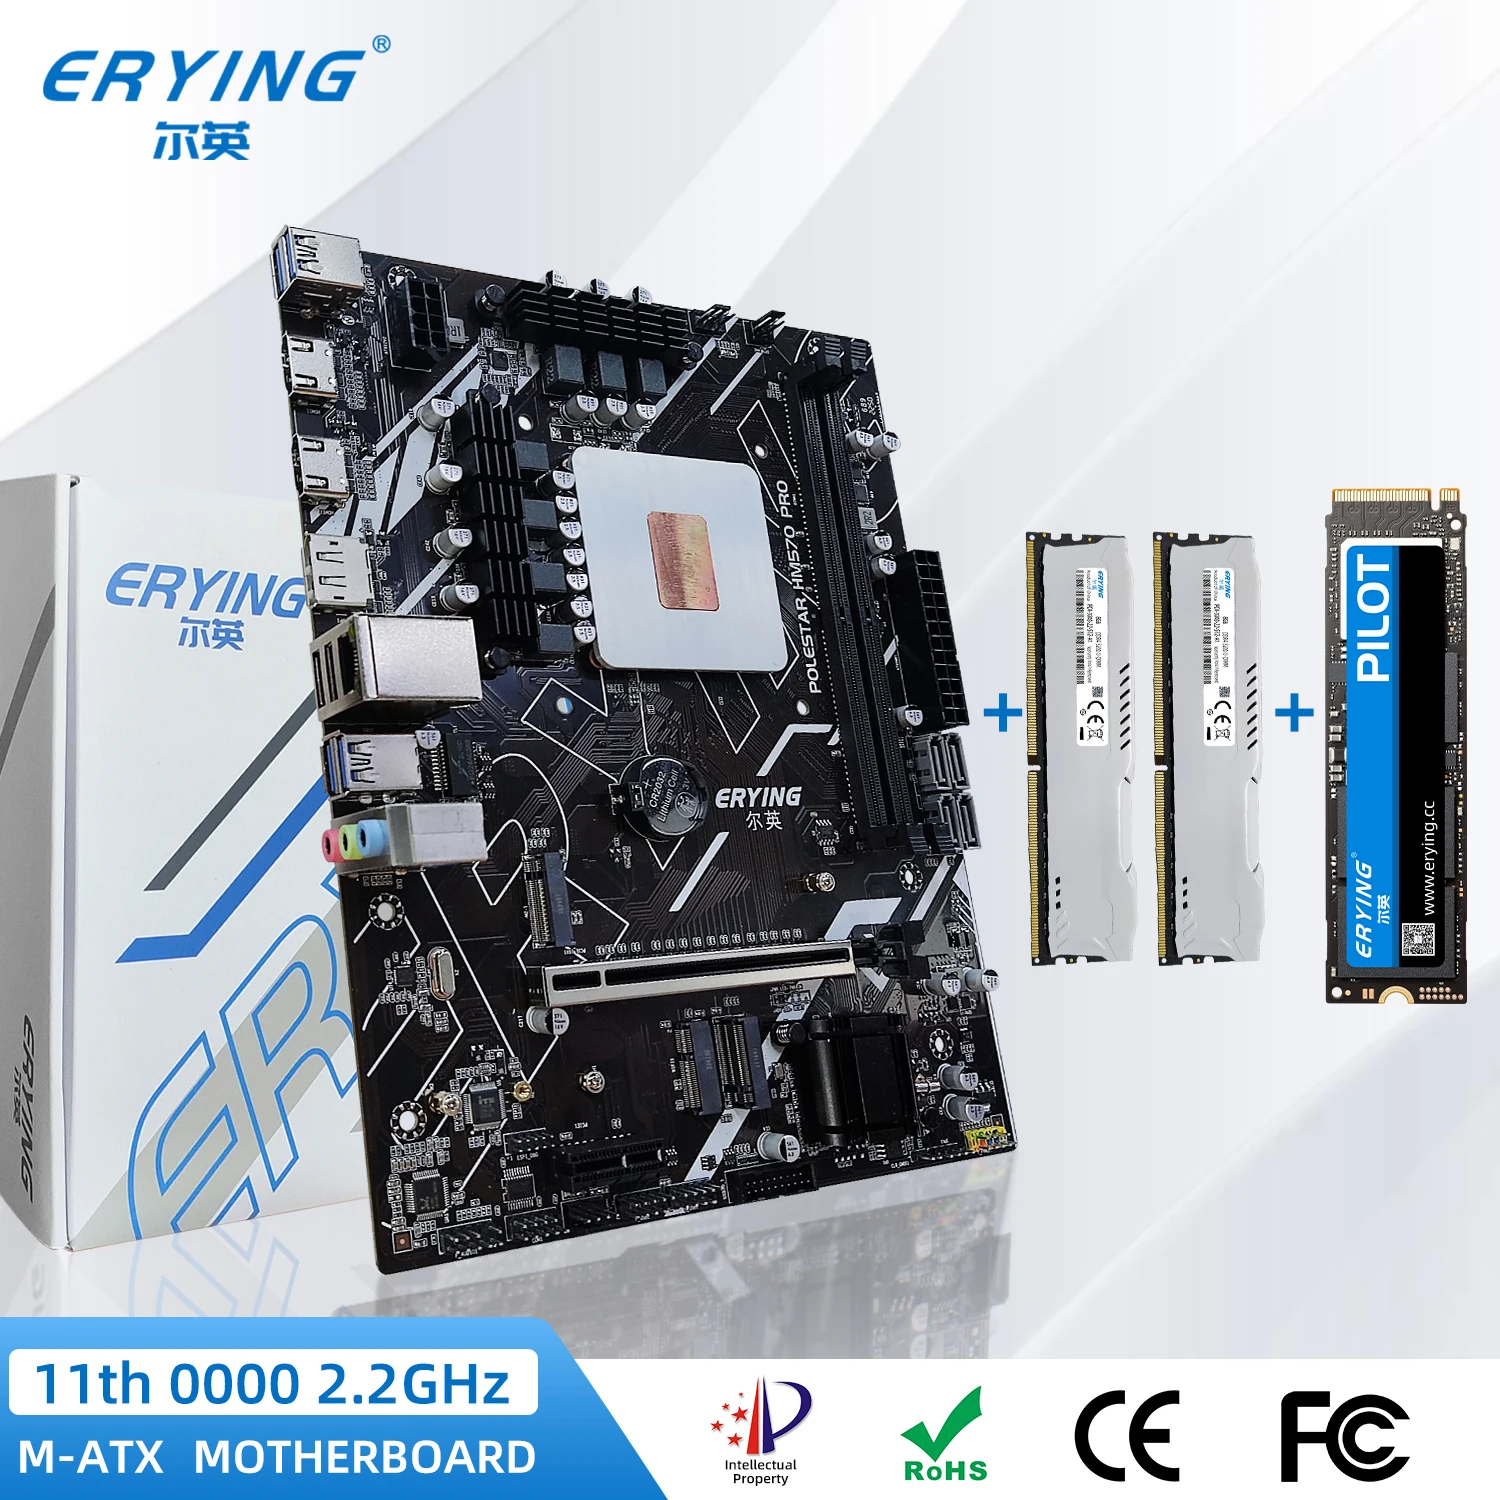 

ERYING i7 Kit Gaming PC Motherboard with embed CPU 11th Core 2.2Ghz( Refer to I7 11800H)+2pcs 8GB 3200Mhz RAM+512GB SSD NVMe M.2